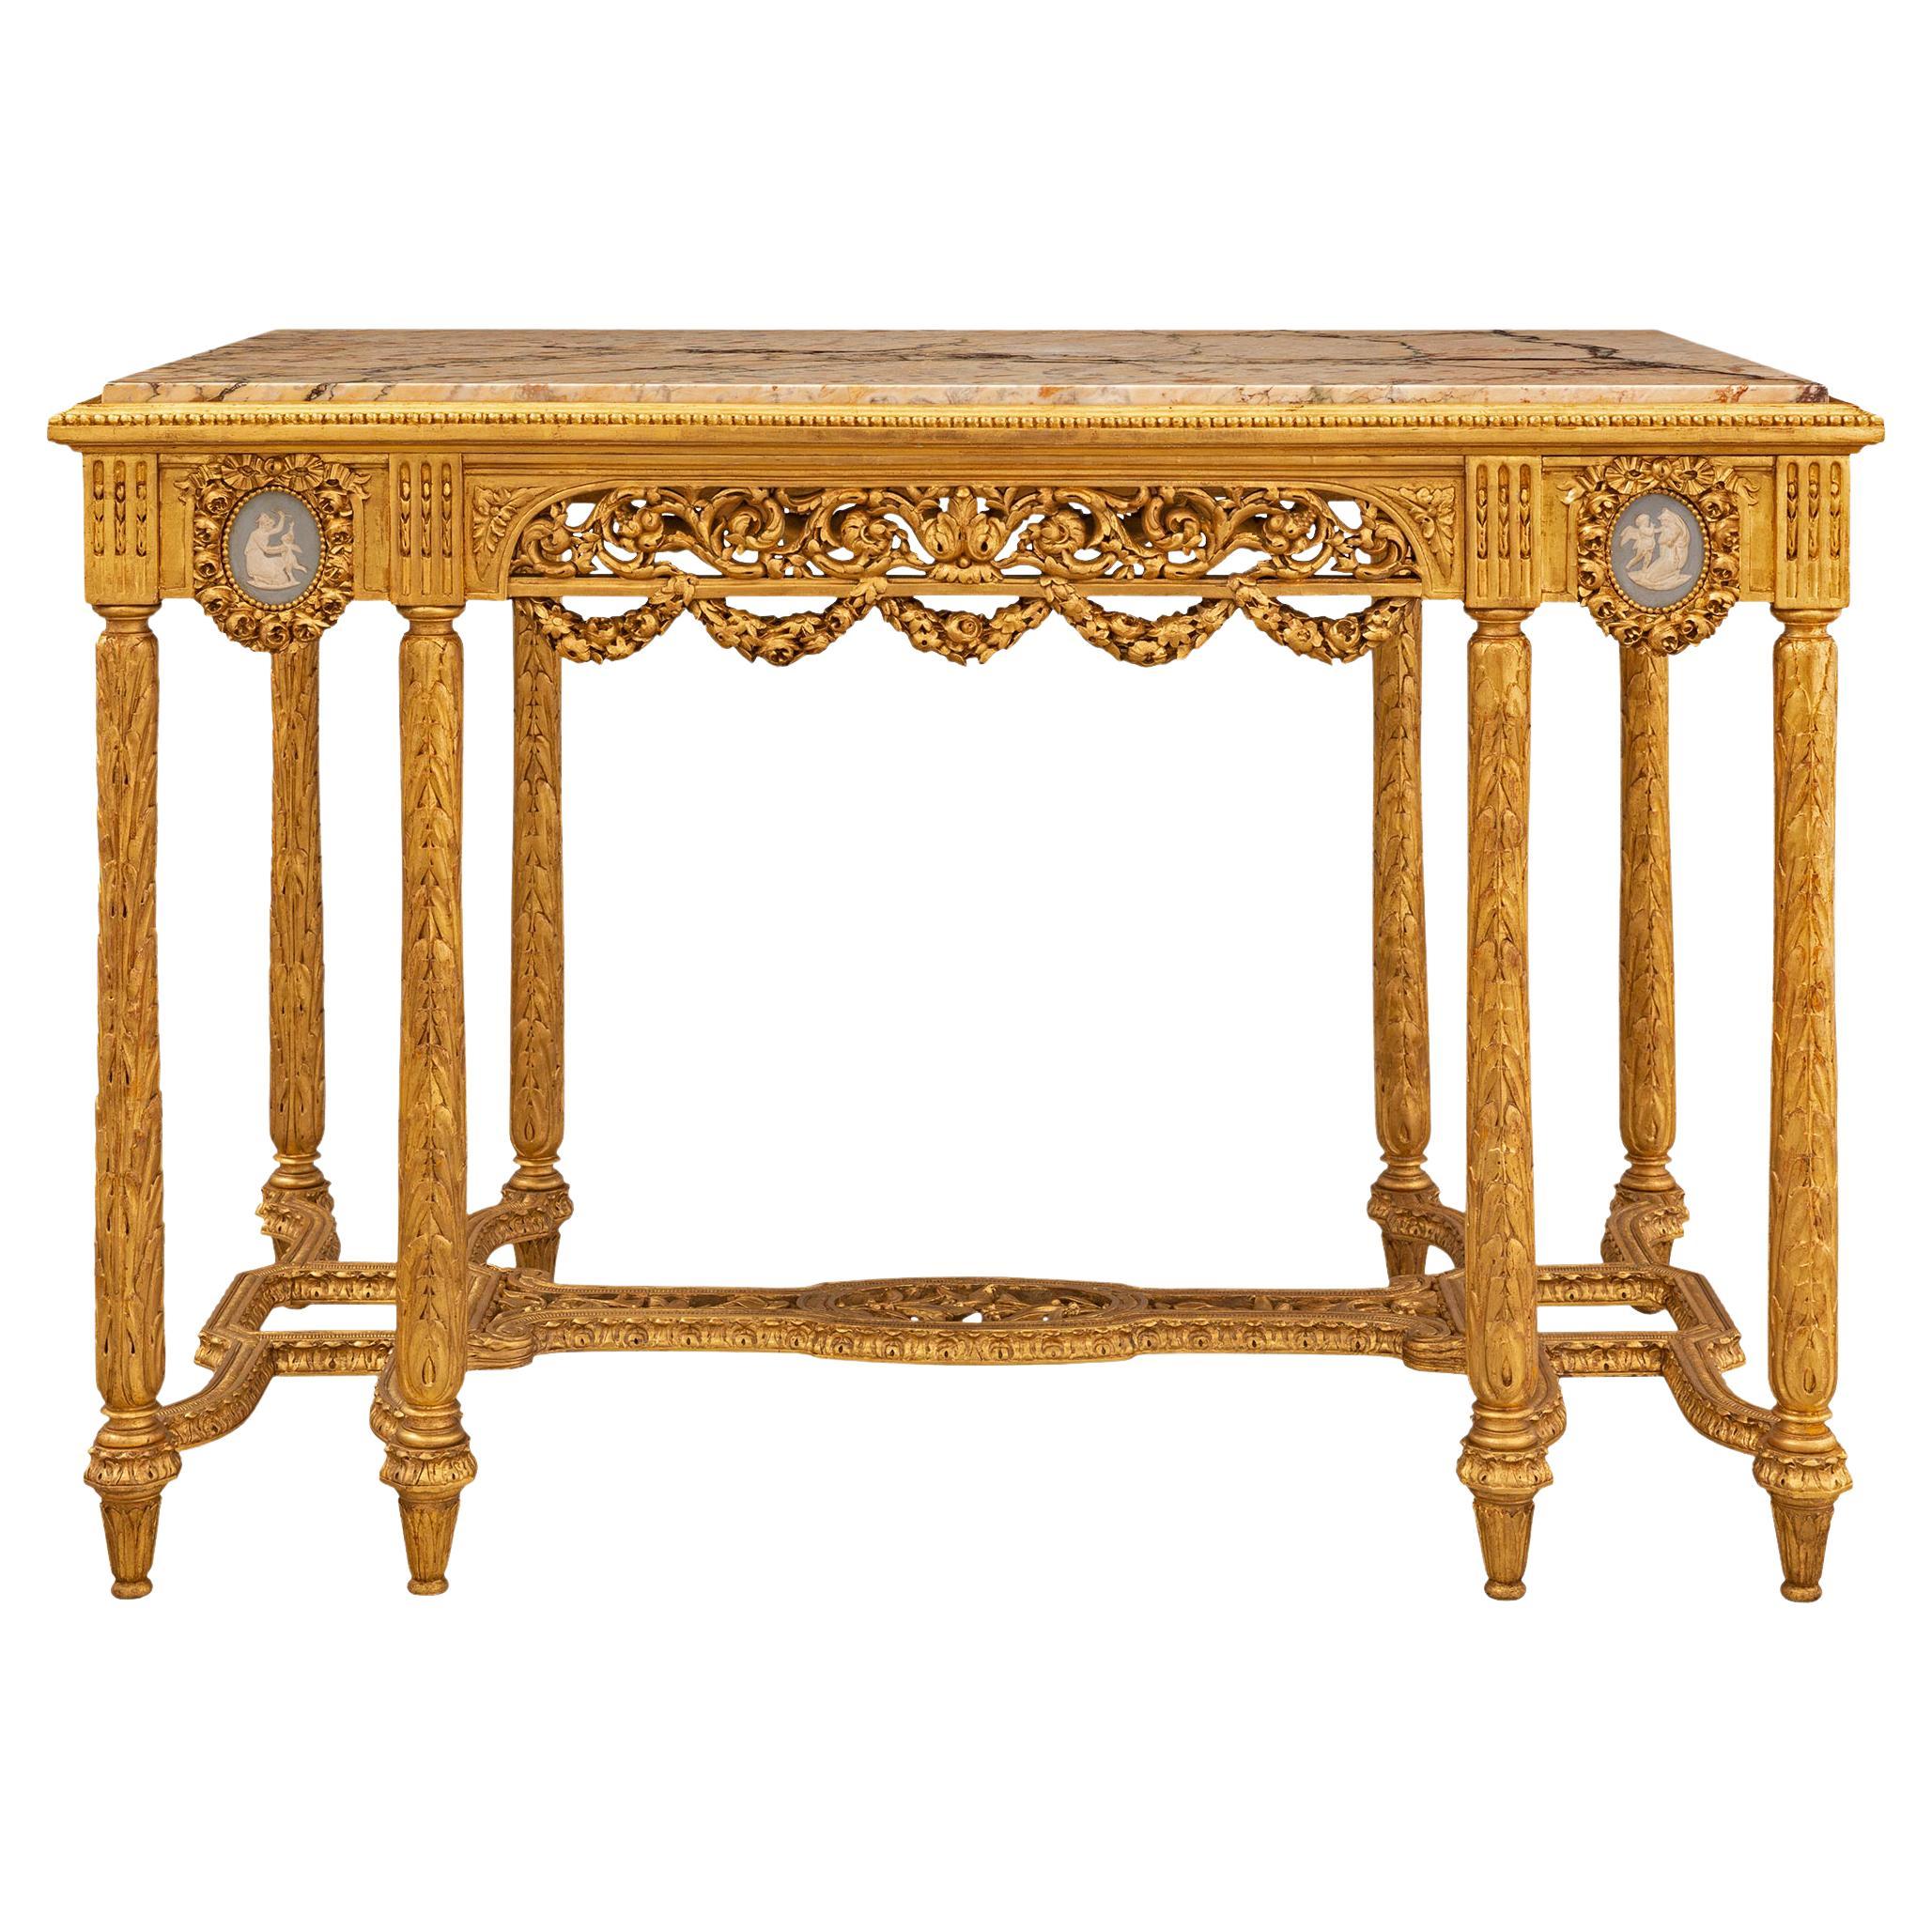 Anglo-French 19th Century Louis XVI St. Center Table